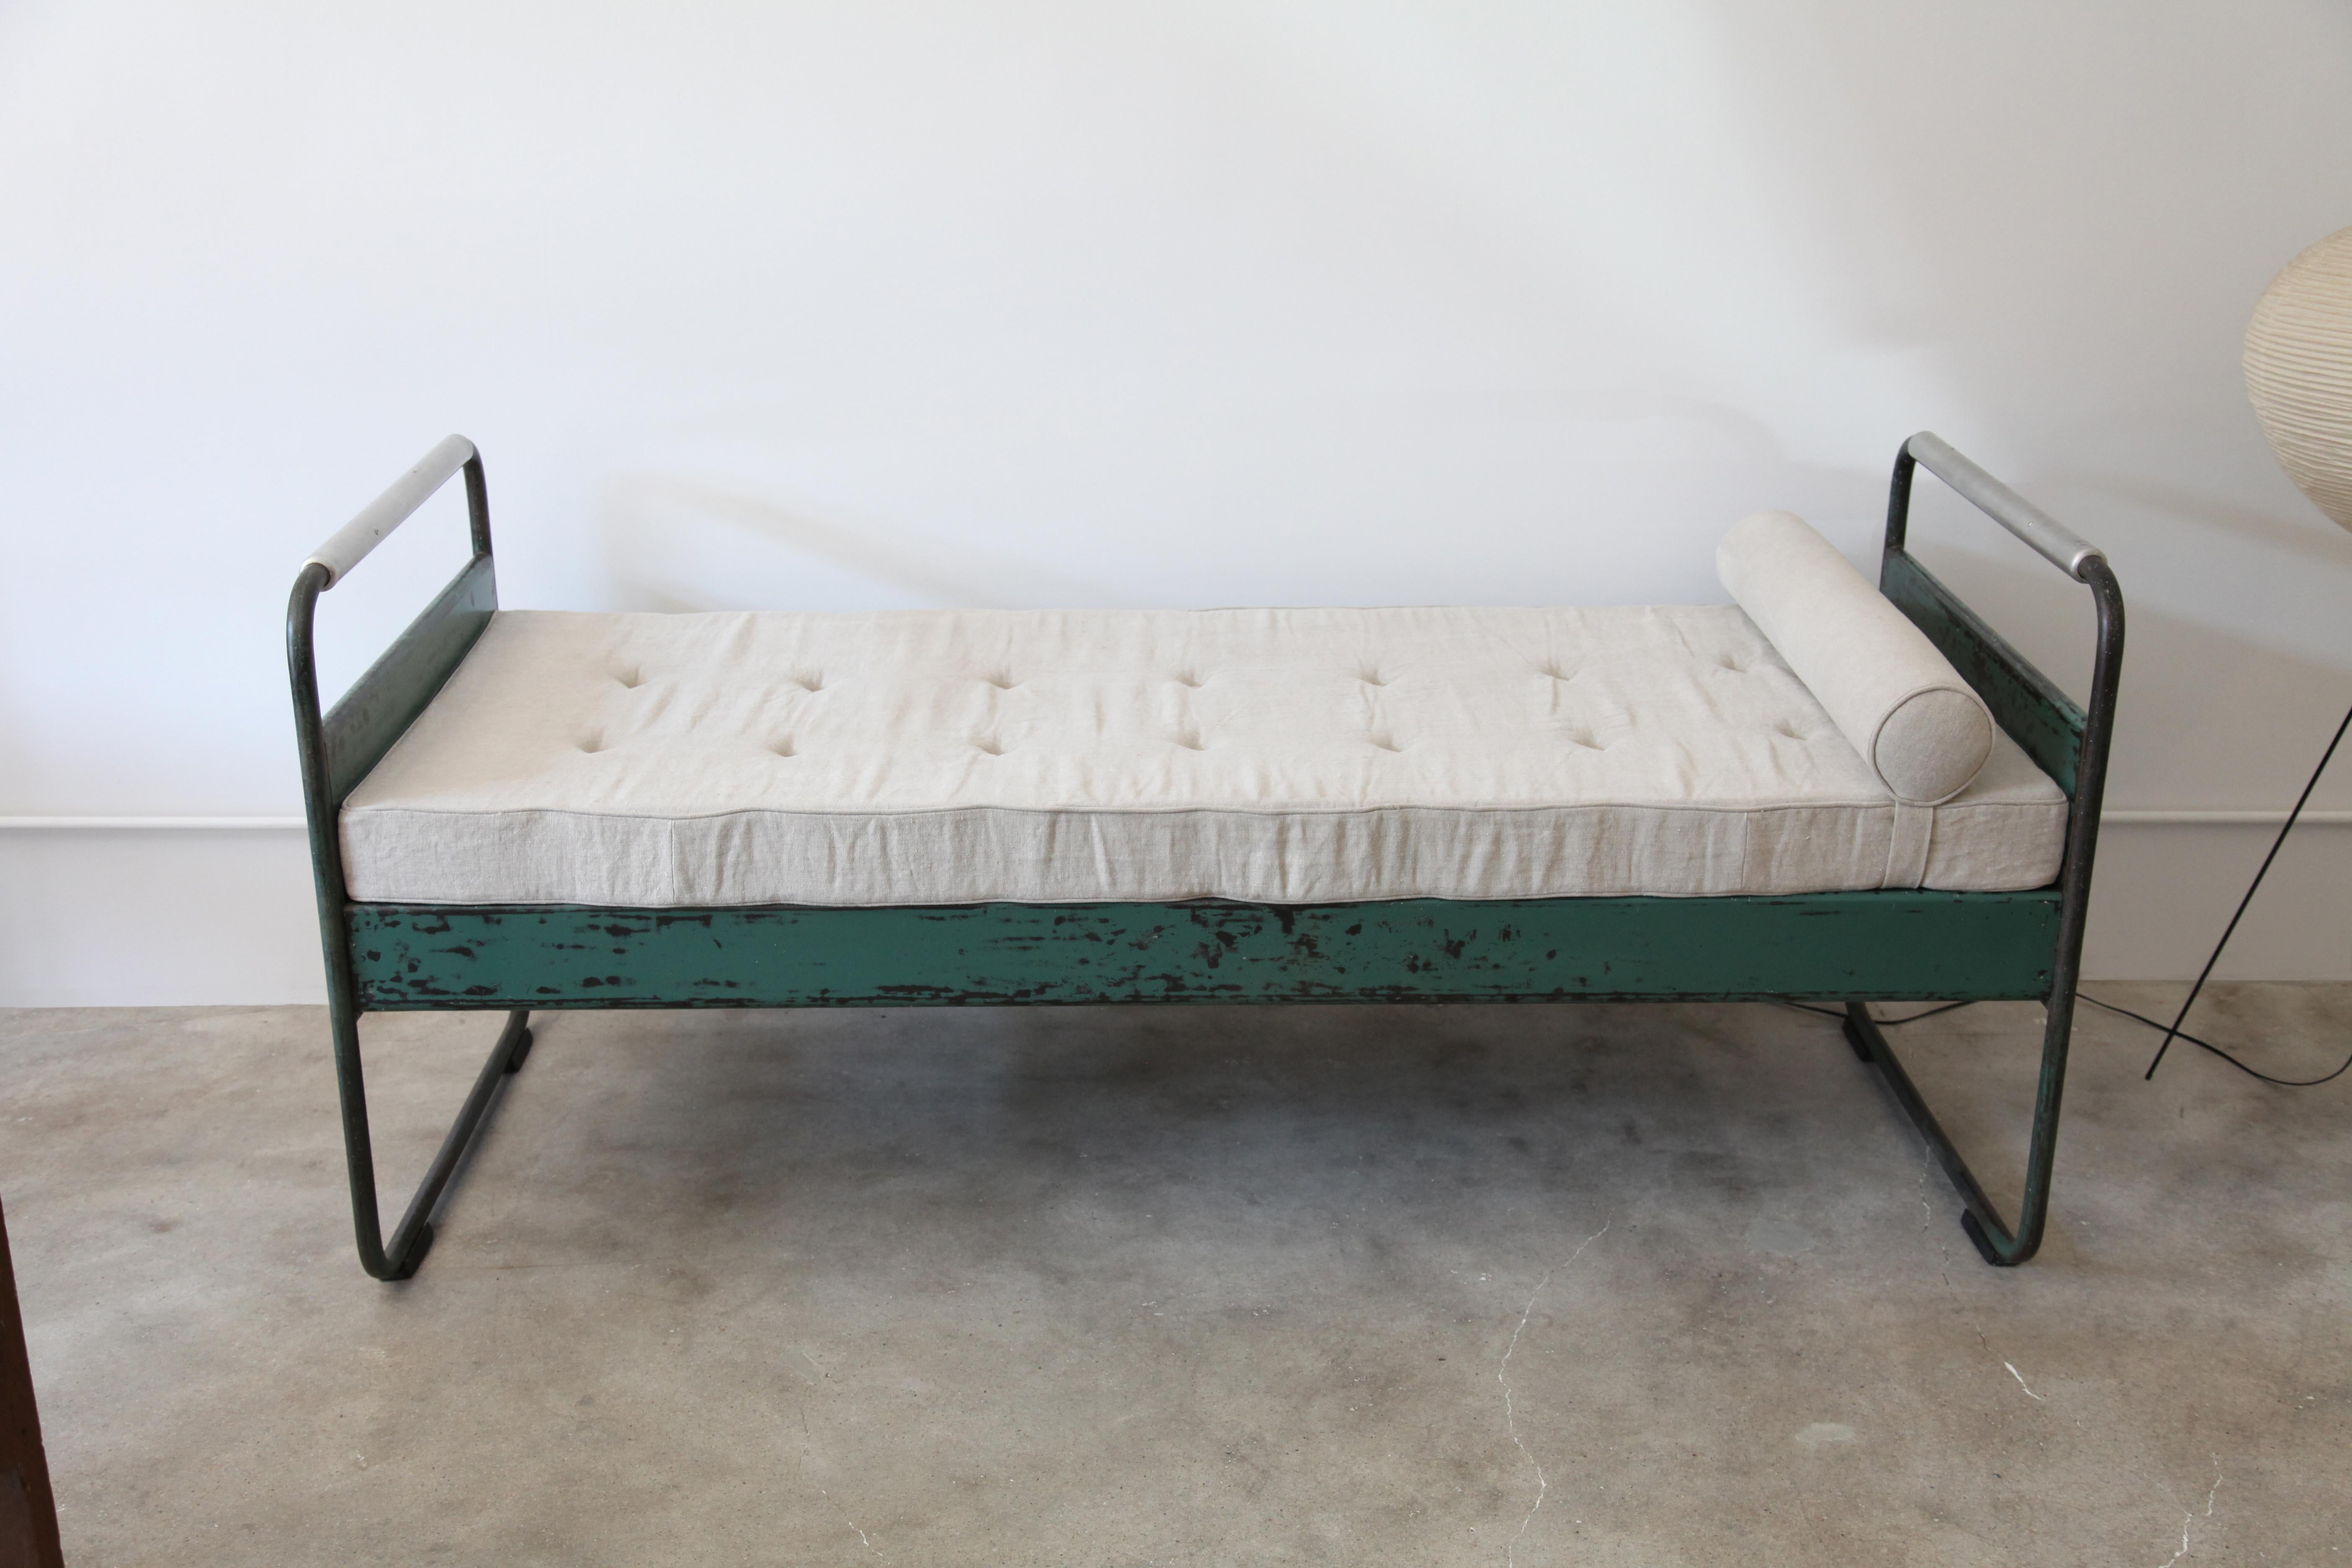 A great early Jean Prouvé bed, circa1935 from the Lycée Fabert, Metz. 

Original paint. Cushion is a newer replacement.